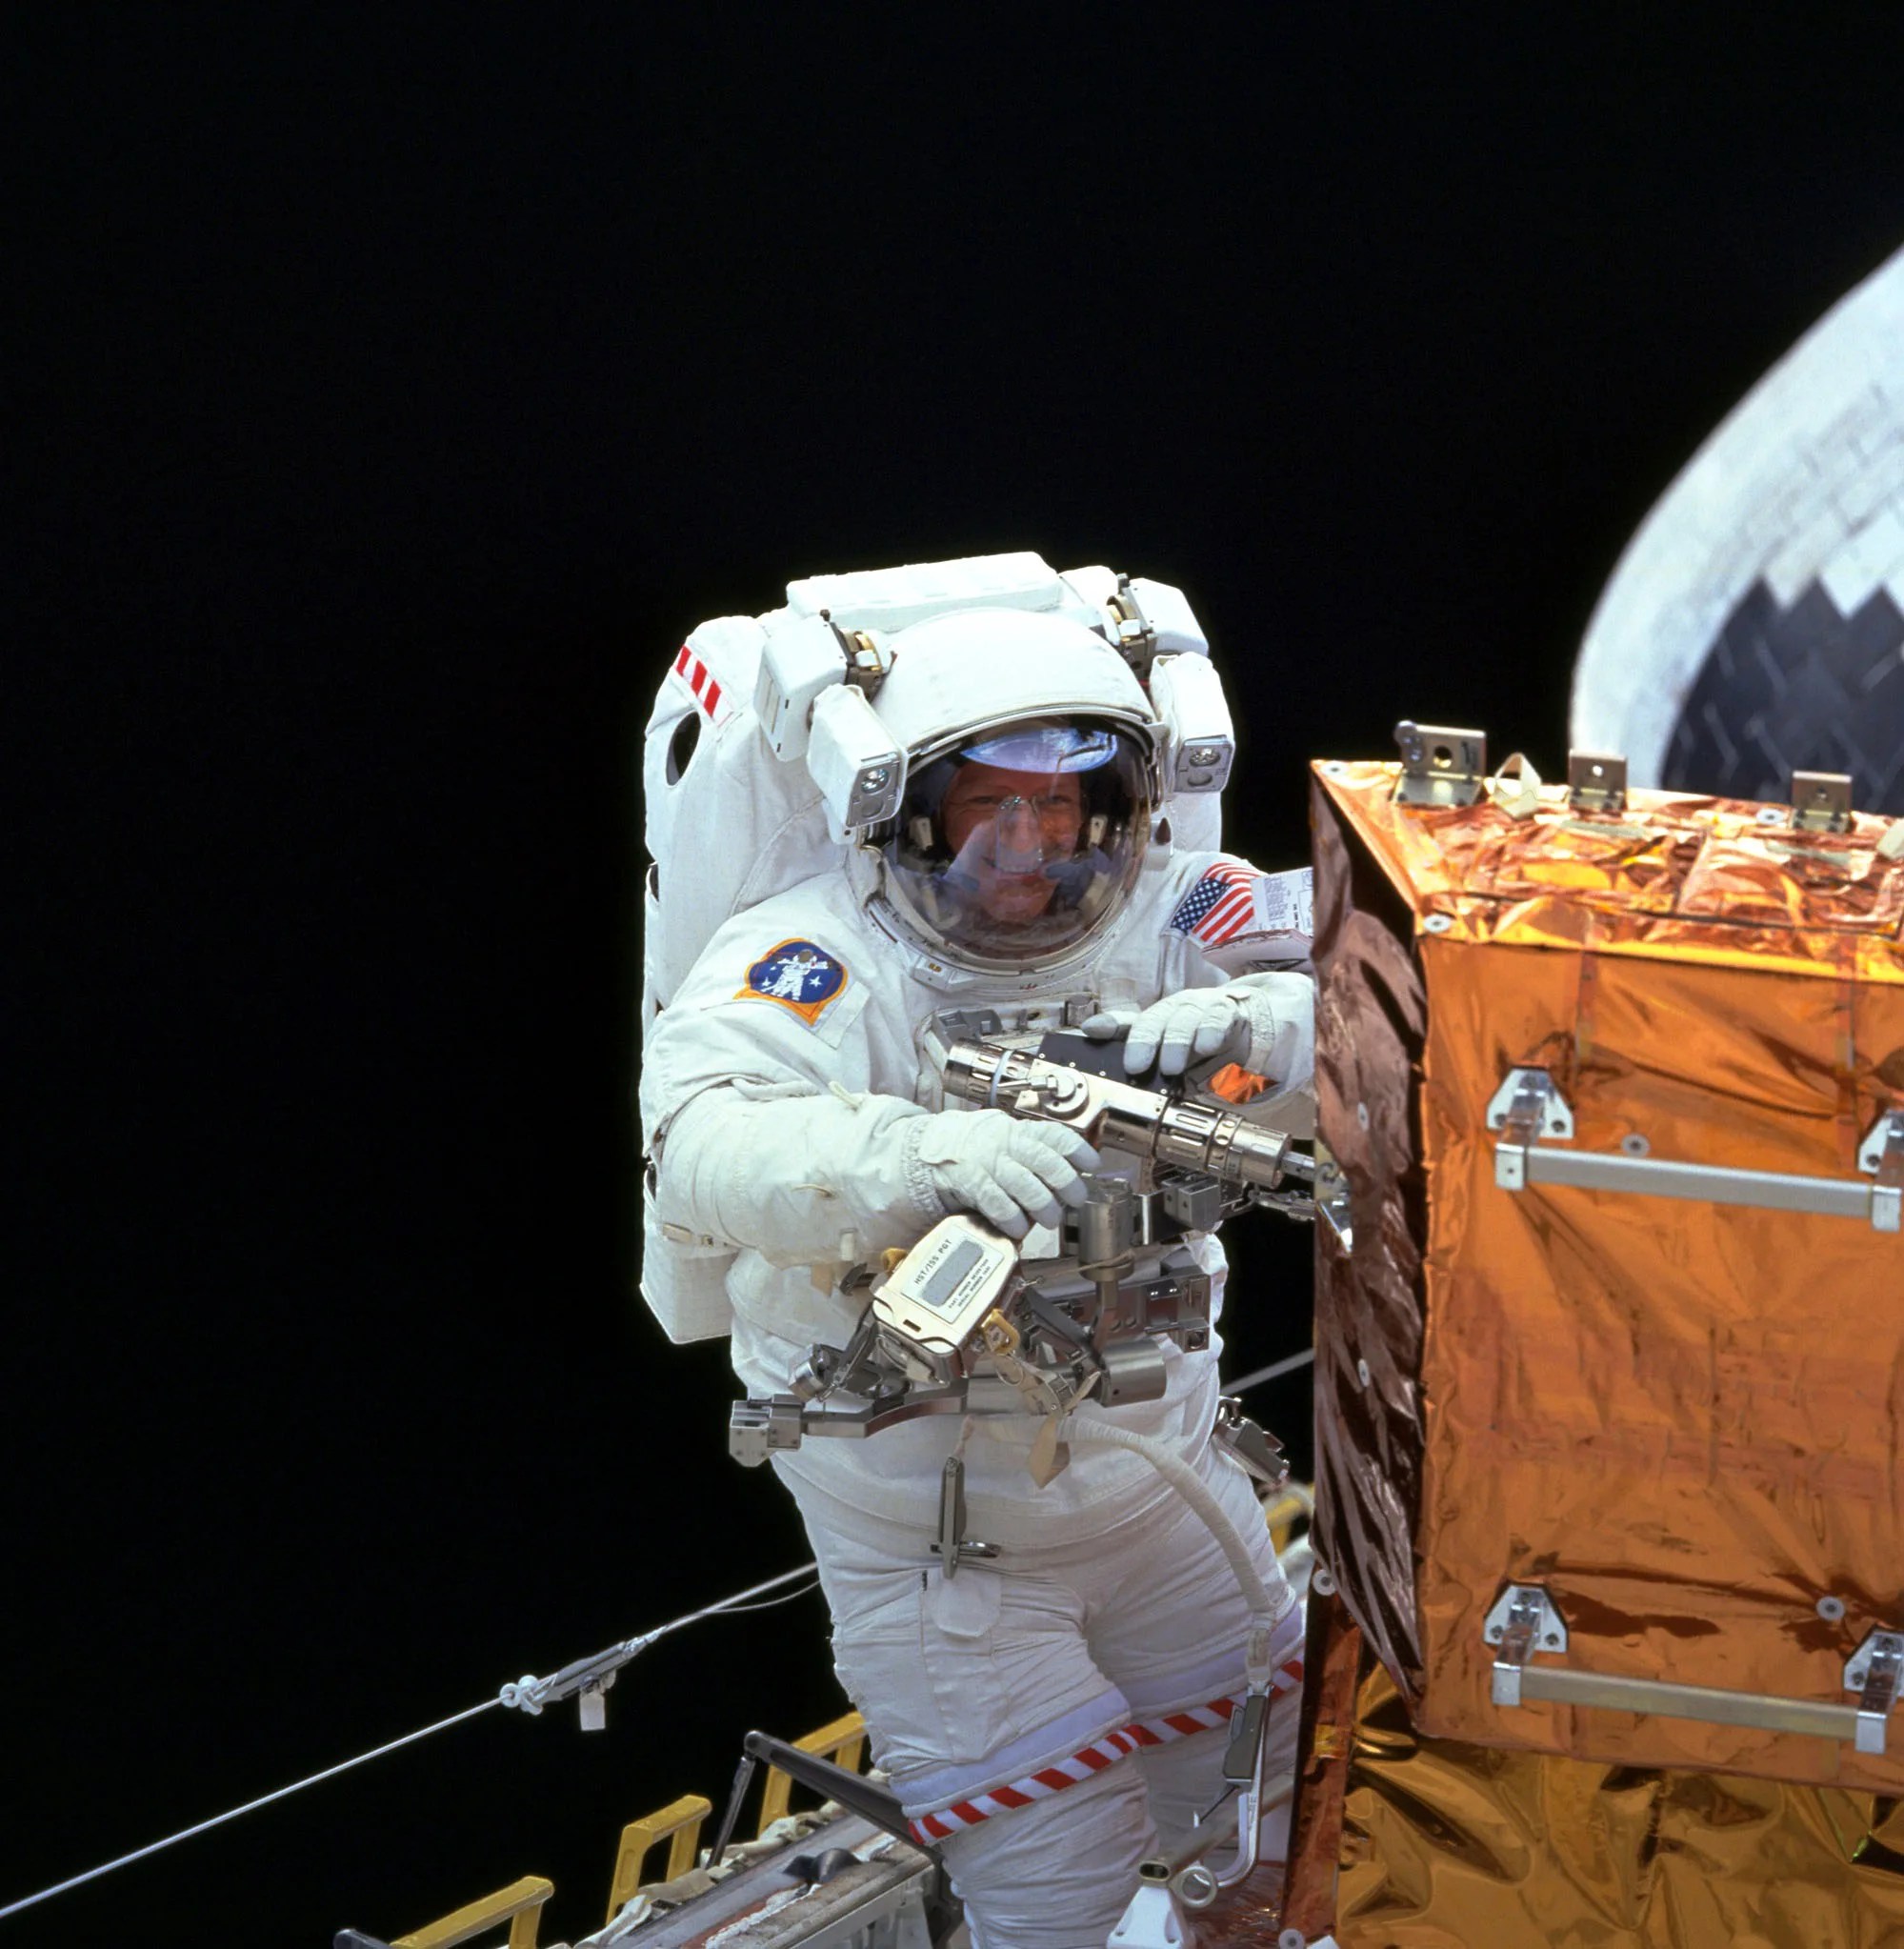 An astronaut holding the Pistol Grip Tool, which looks like an electric screwdriver. The astronaut's face is visible through his visor, he is smiling. He stands next to a large gold box with a bit of the Shuttle visible behind him.